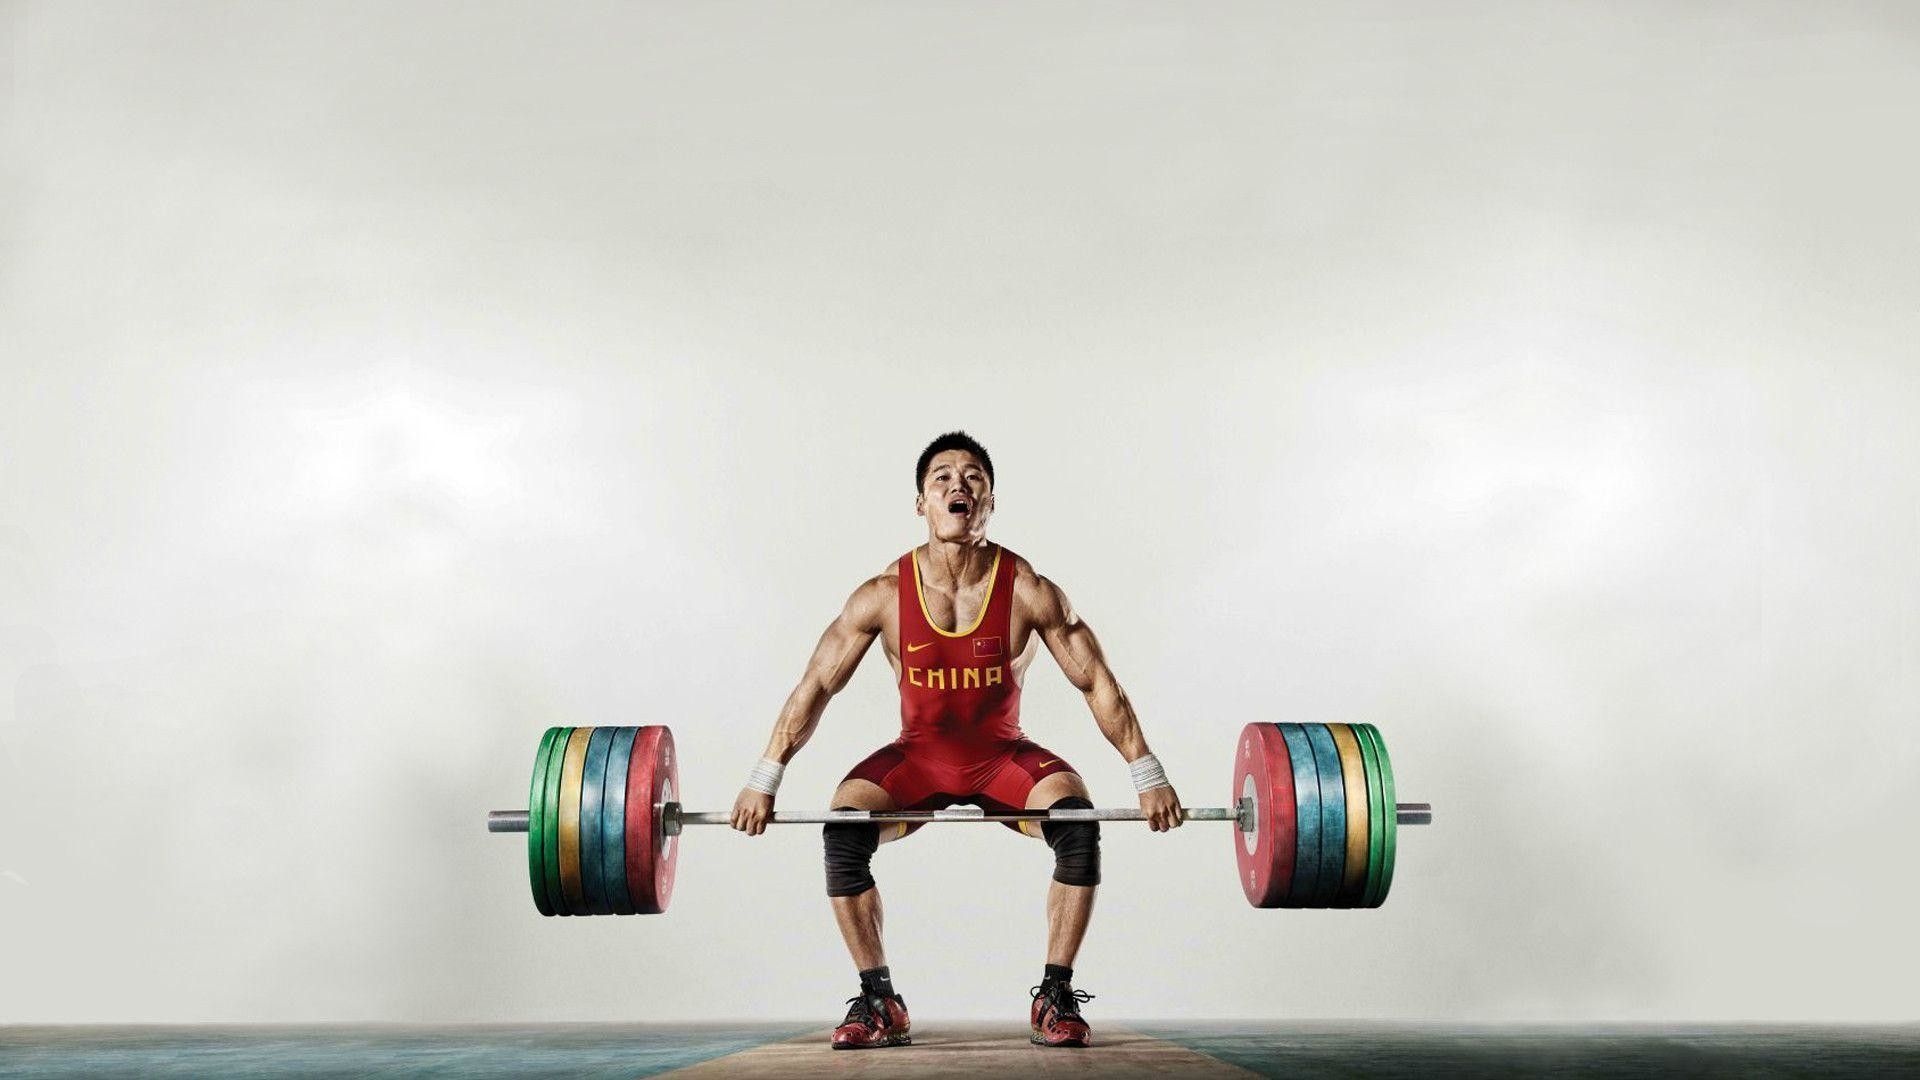 Weightlifting: Chinese weightlifter, Nike, A deadlift suit, Lifting a barbell loaded with weight plates. 1920x1080 Full HD Background.